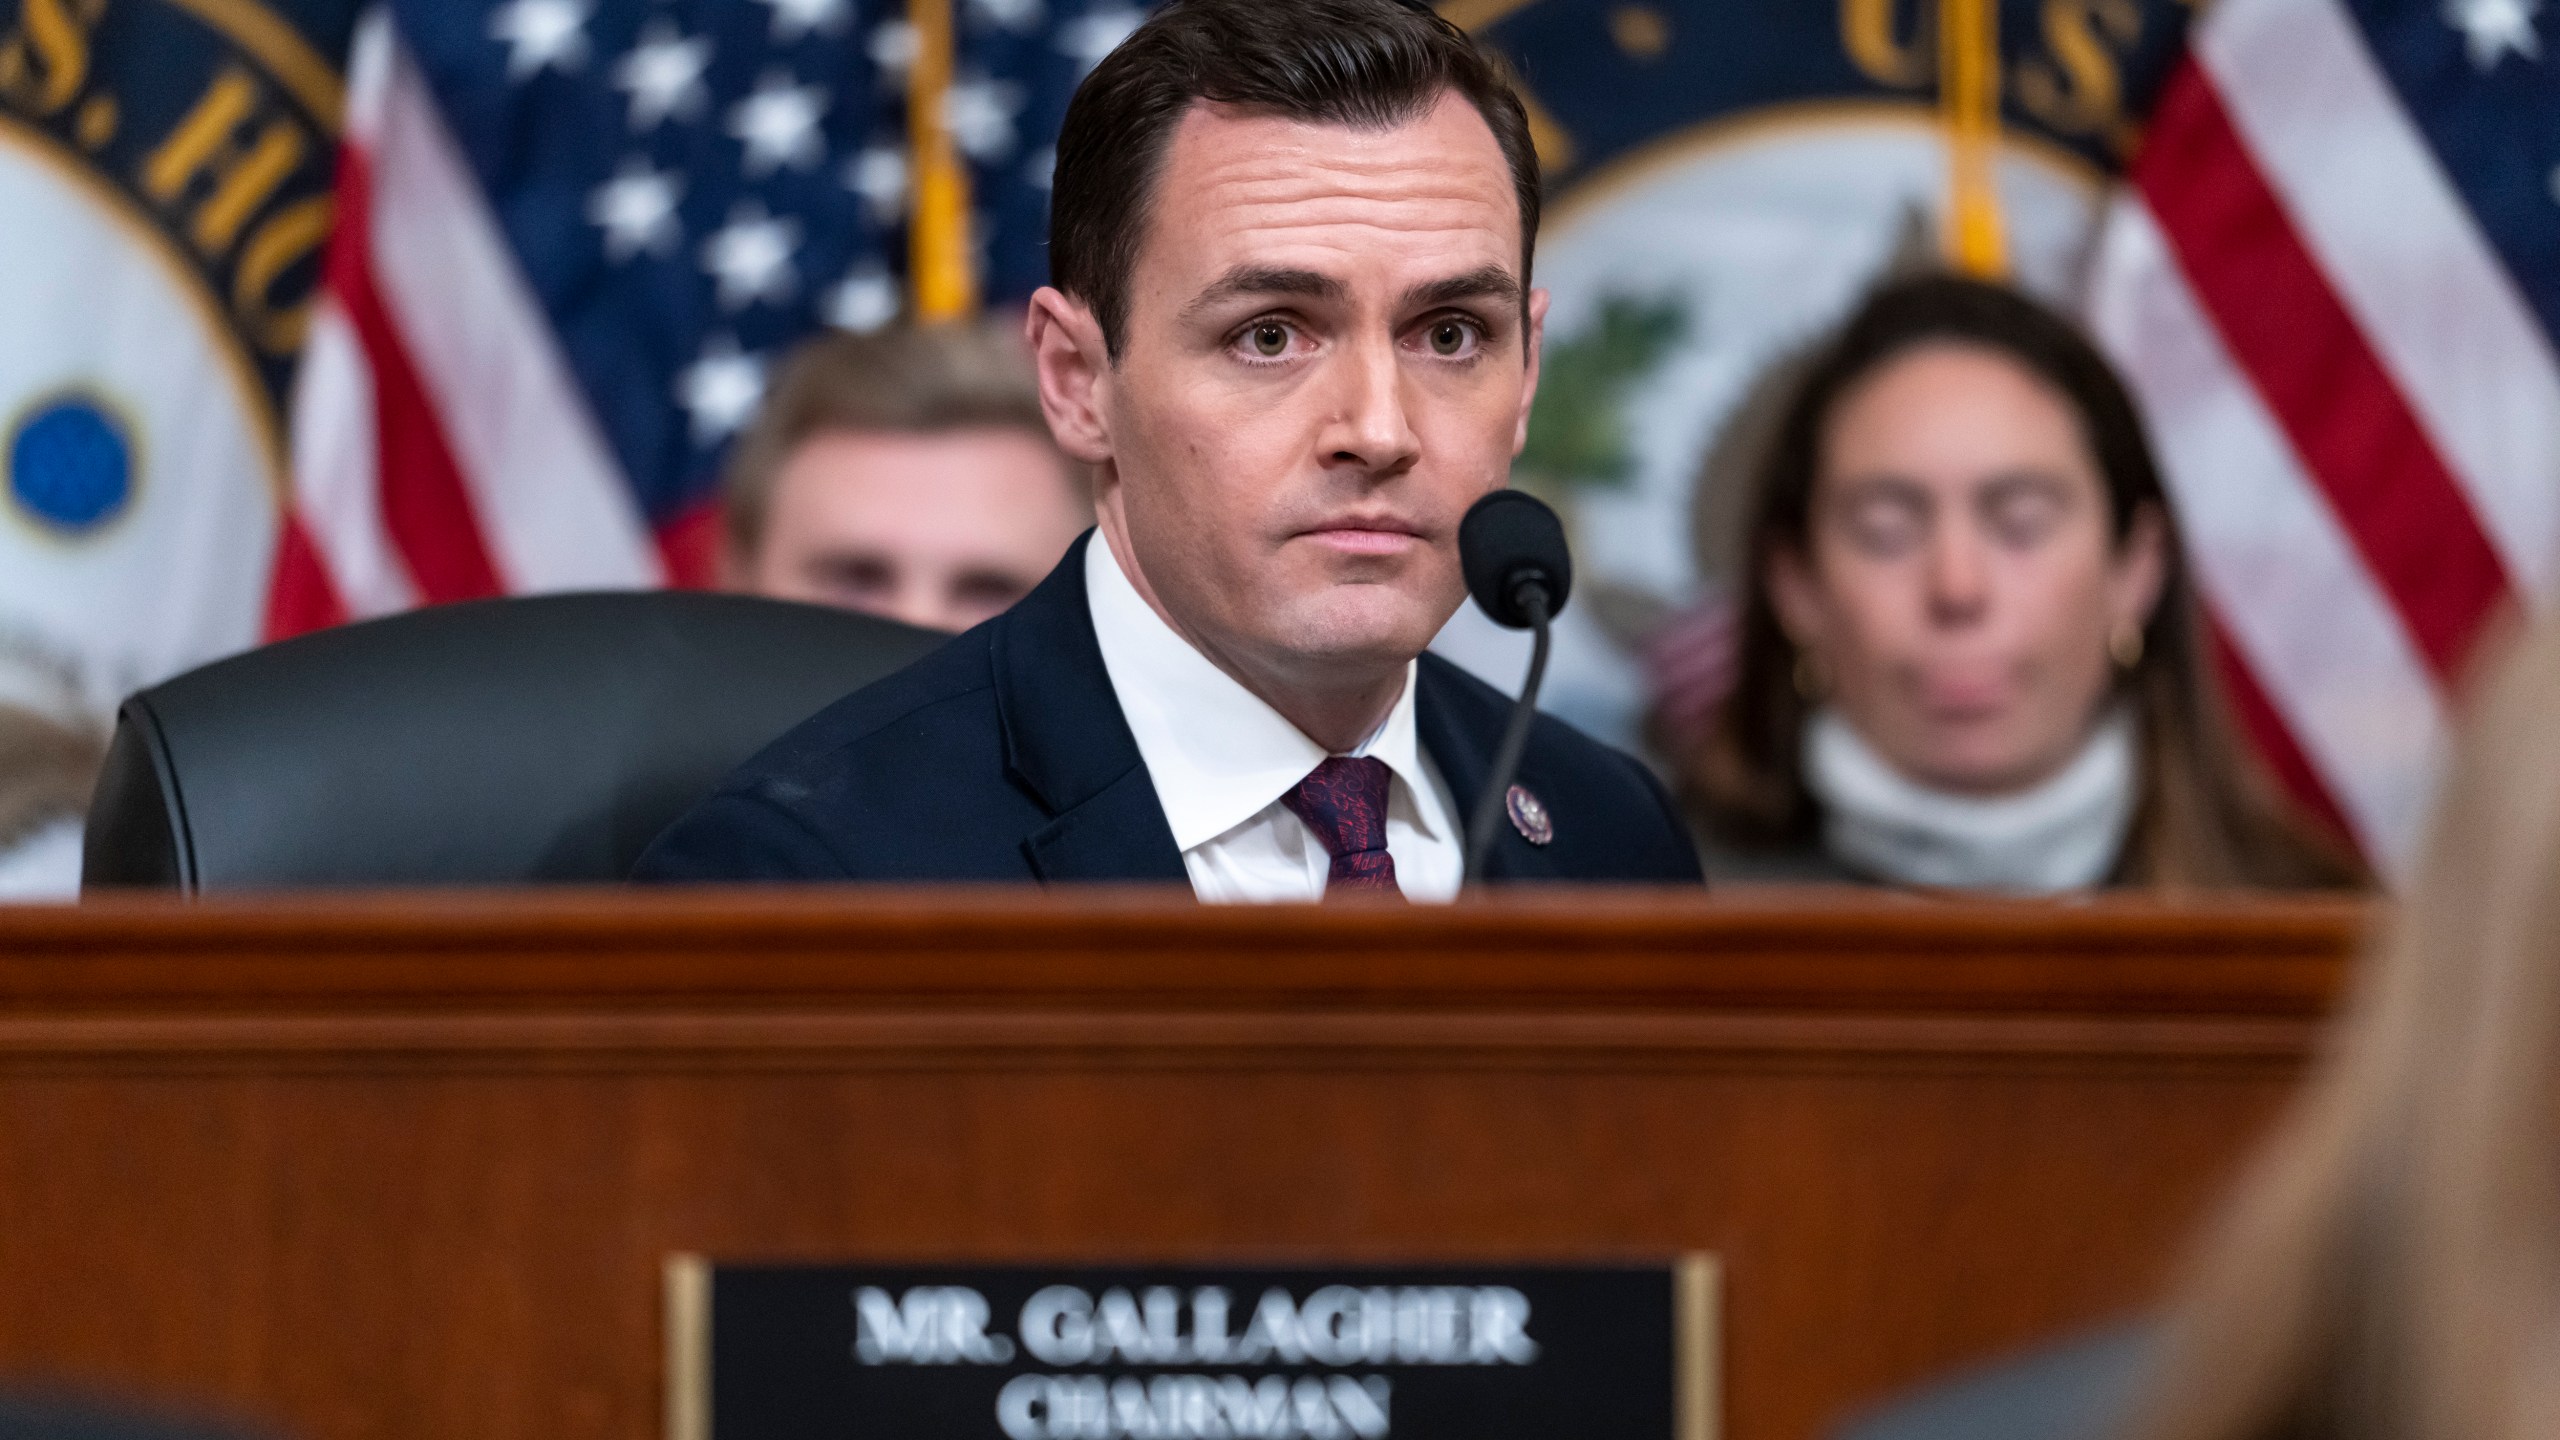 FILE - Chairman Mike Gallagher, R-Wis., leads a hearing at the Capitol in Washington, Feb. 28, 2023. Gallagher, who has spearheaded House pushback against the Chinese government, announced Friday, March 22, 2024, he will resign from his position in the House on April 19. (AP Photo/J. Scott Applewhite, File)